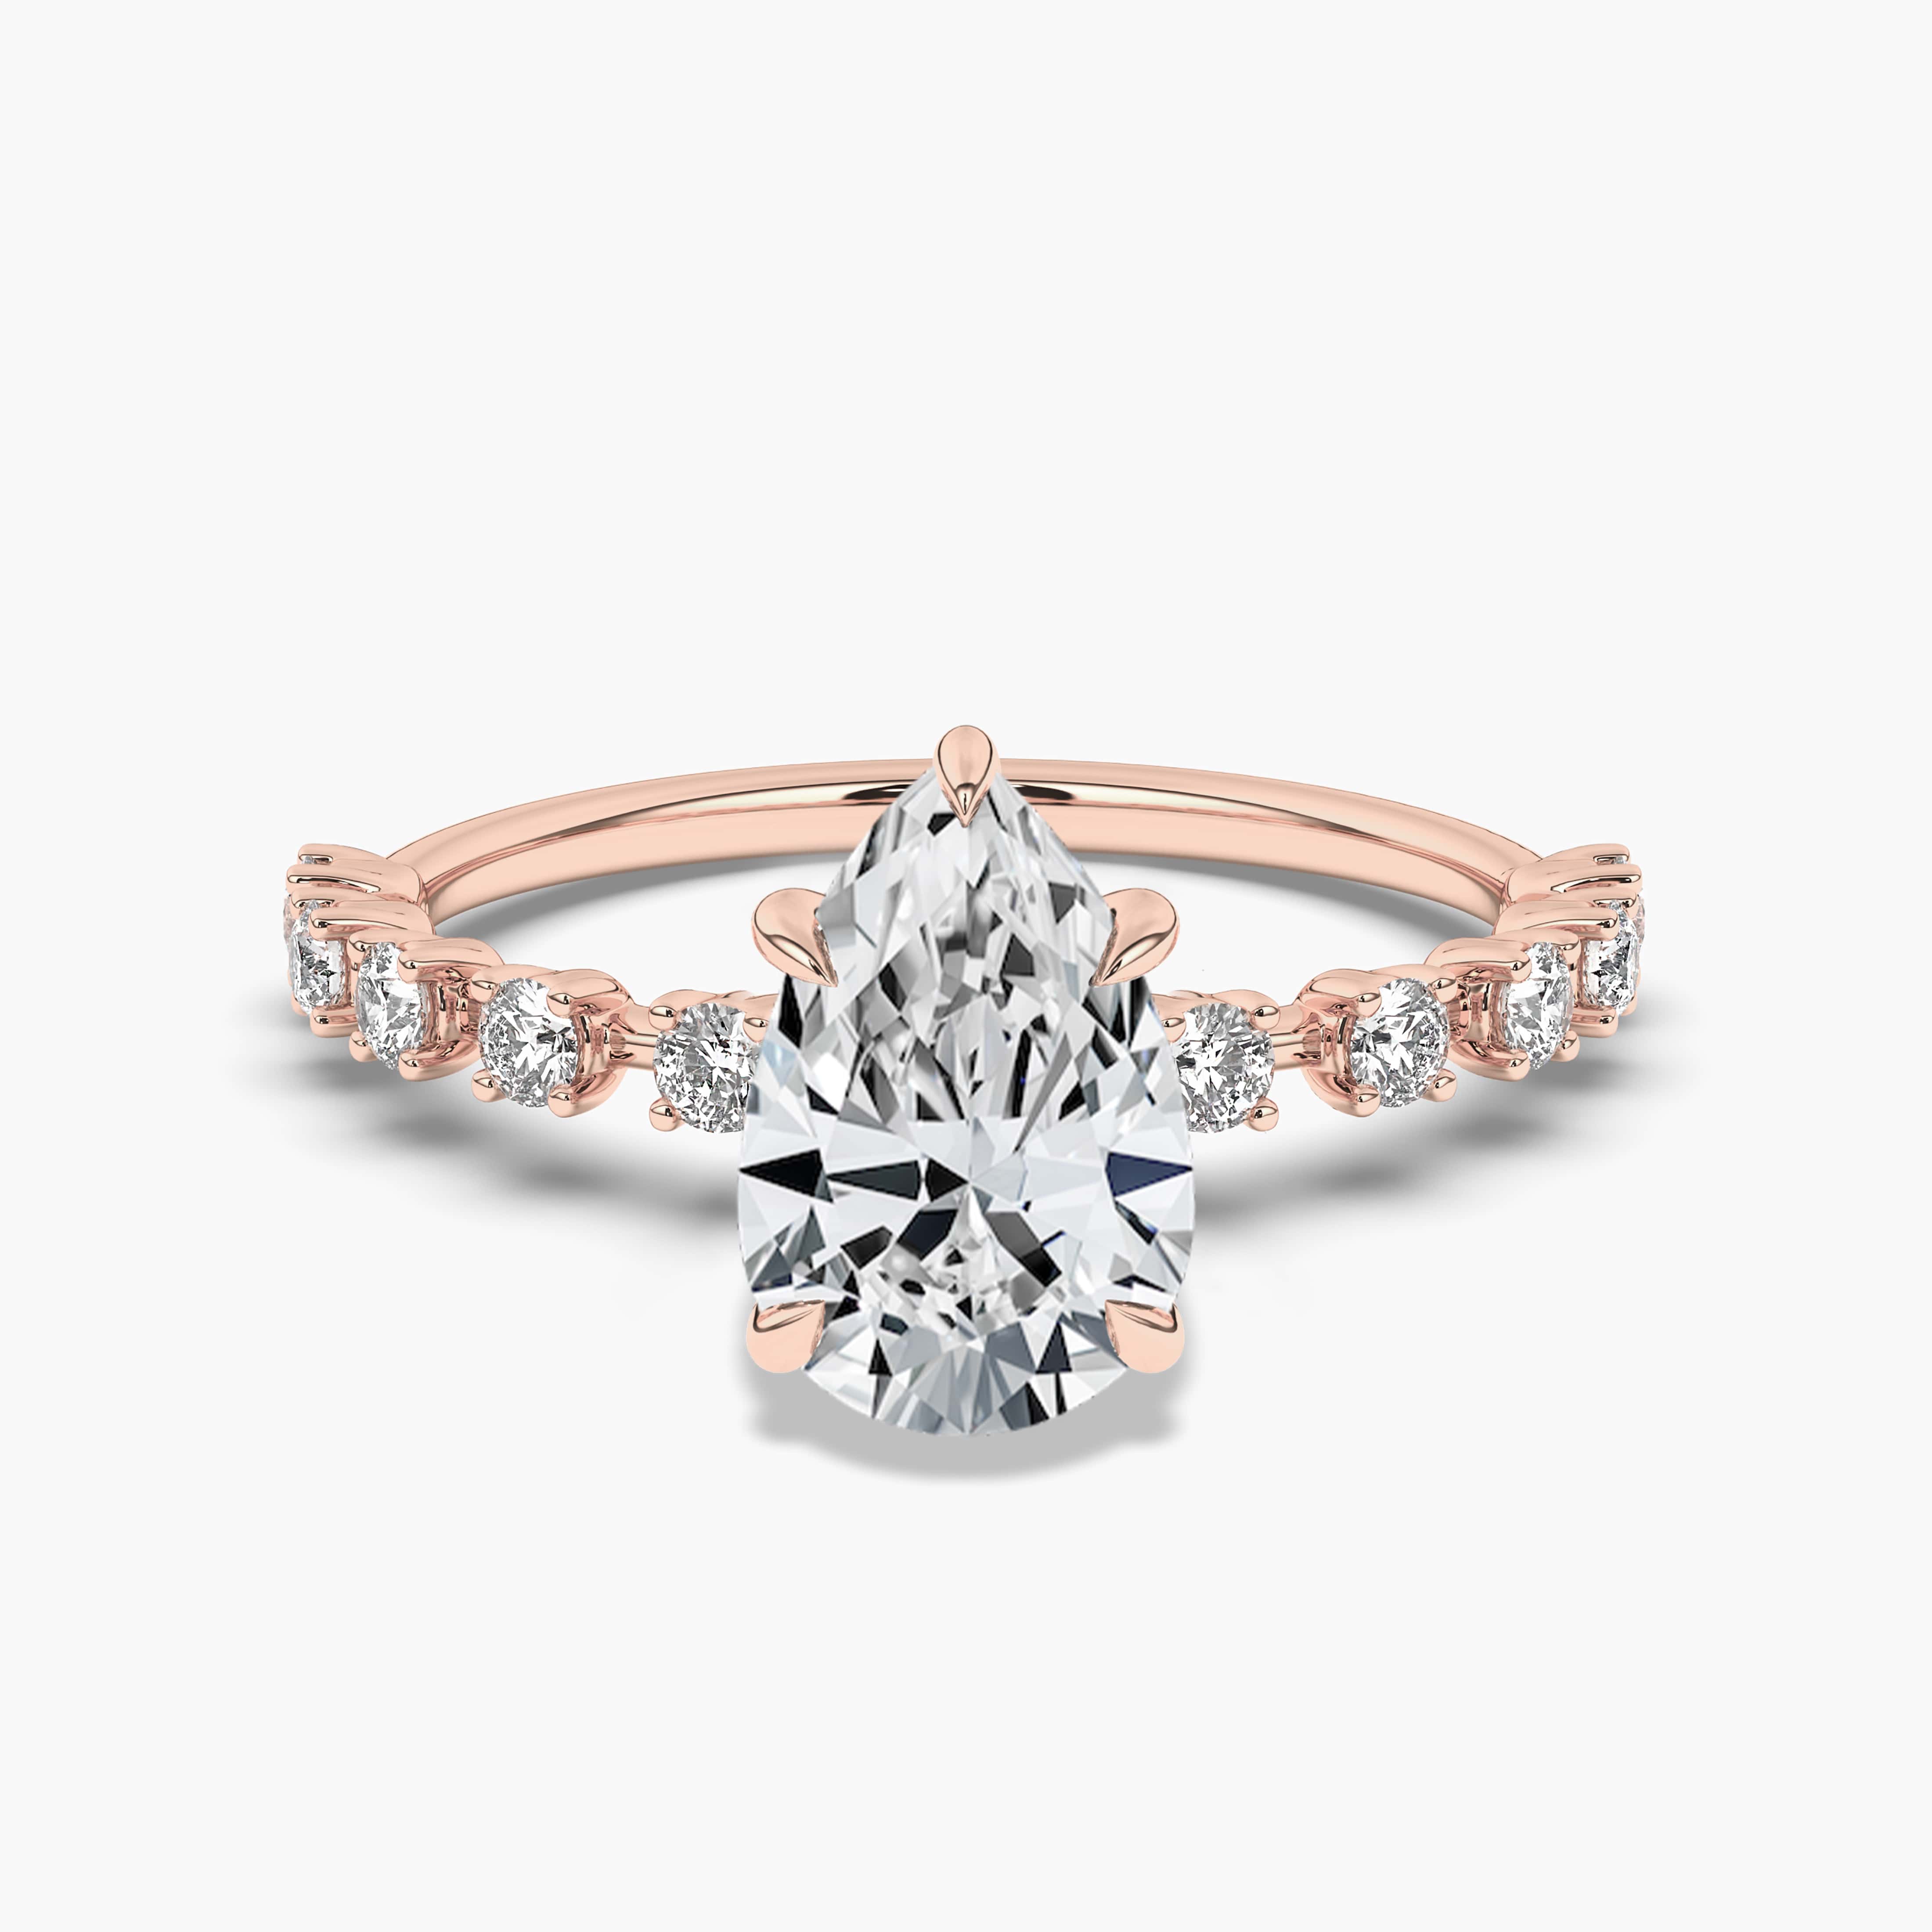 2.00carat Pear engagement rings gold in rose gold